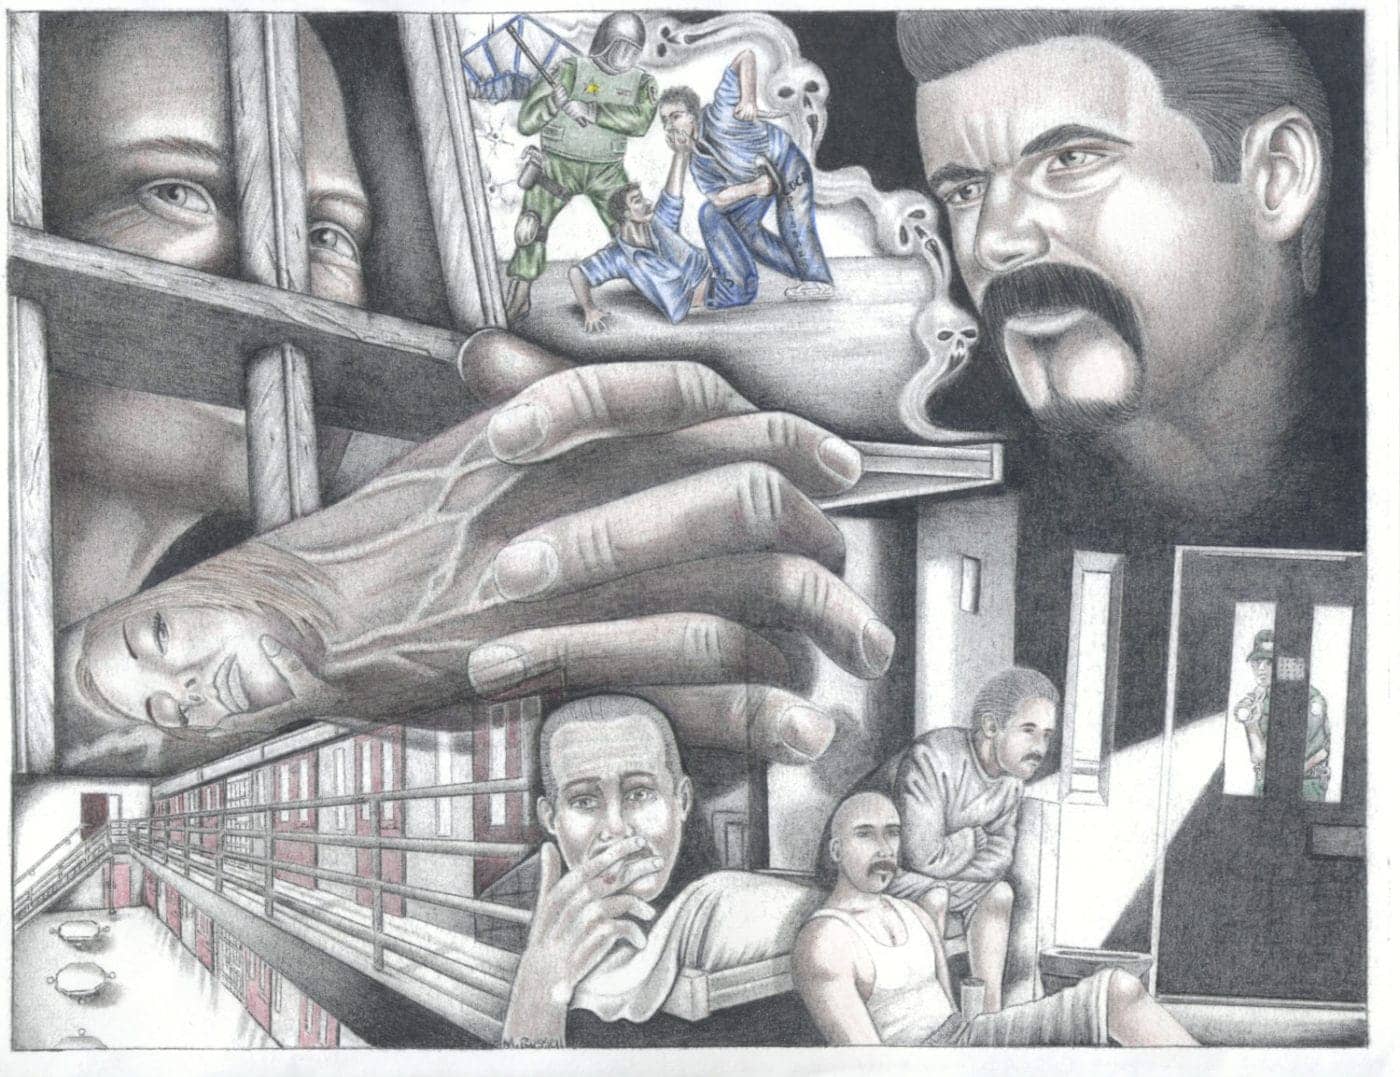 Everyday-Life-in-Californias-Level-4-Prisons-art-by-Michael-D.-Russell-1400x1077, Who really is the ‘Worst of the Worst’?, Abolition Now! 